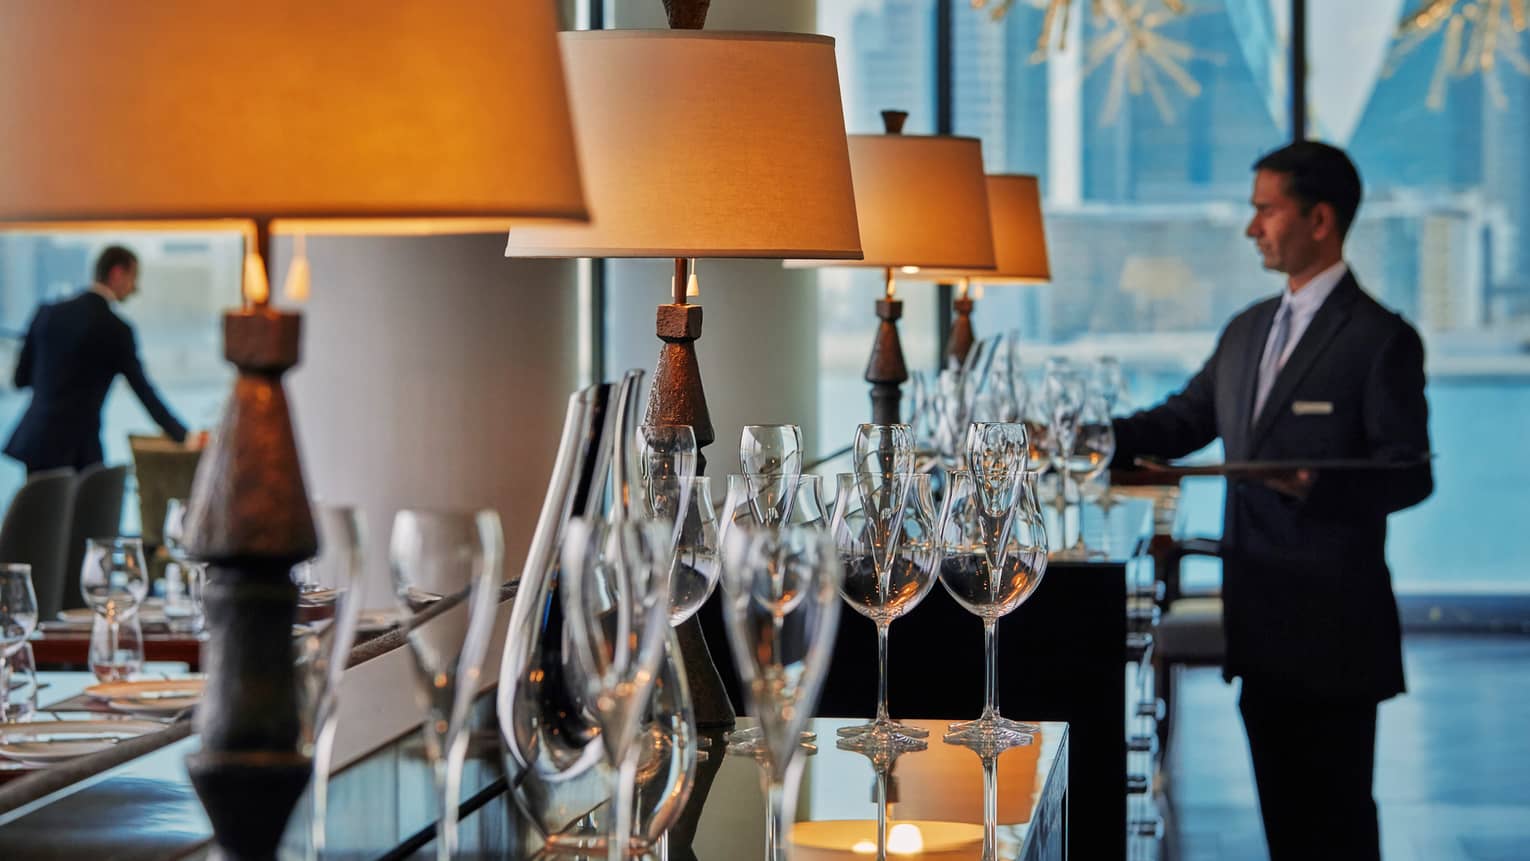 CUT by Wolfgang Puck restaurant sideboard lined with tall, shaded wooden lamps and champagne flutes, staff in background